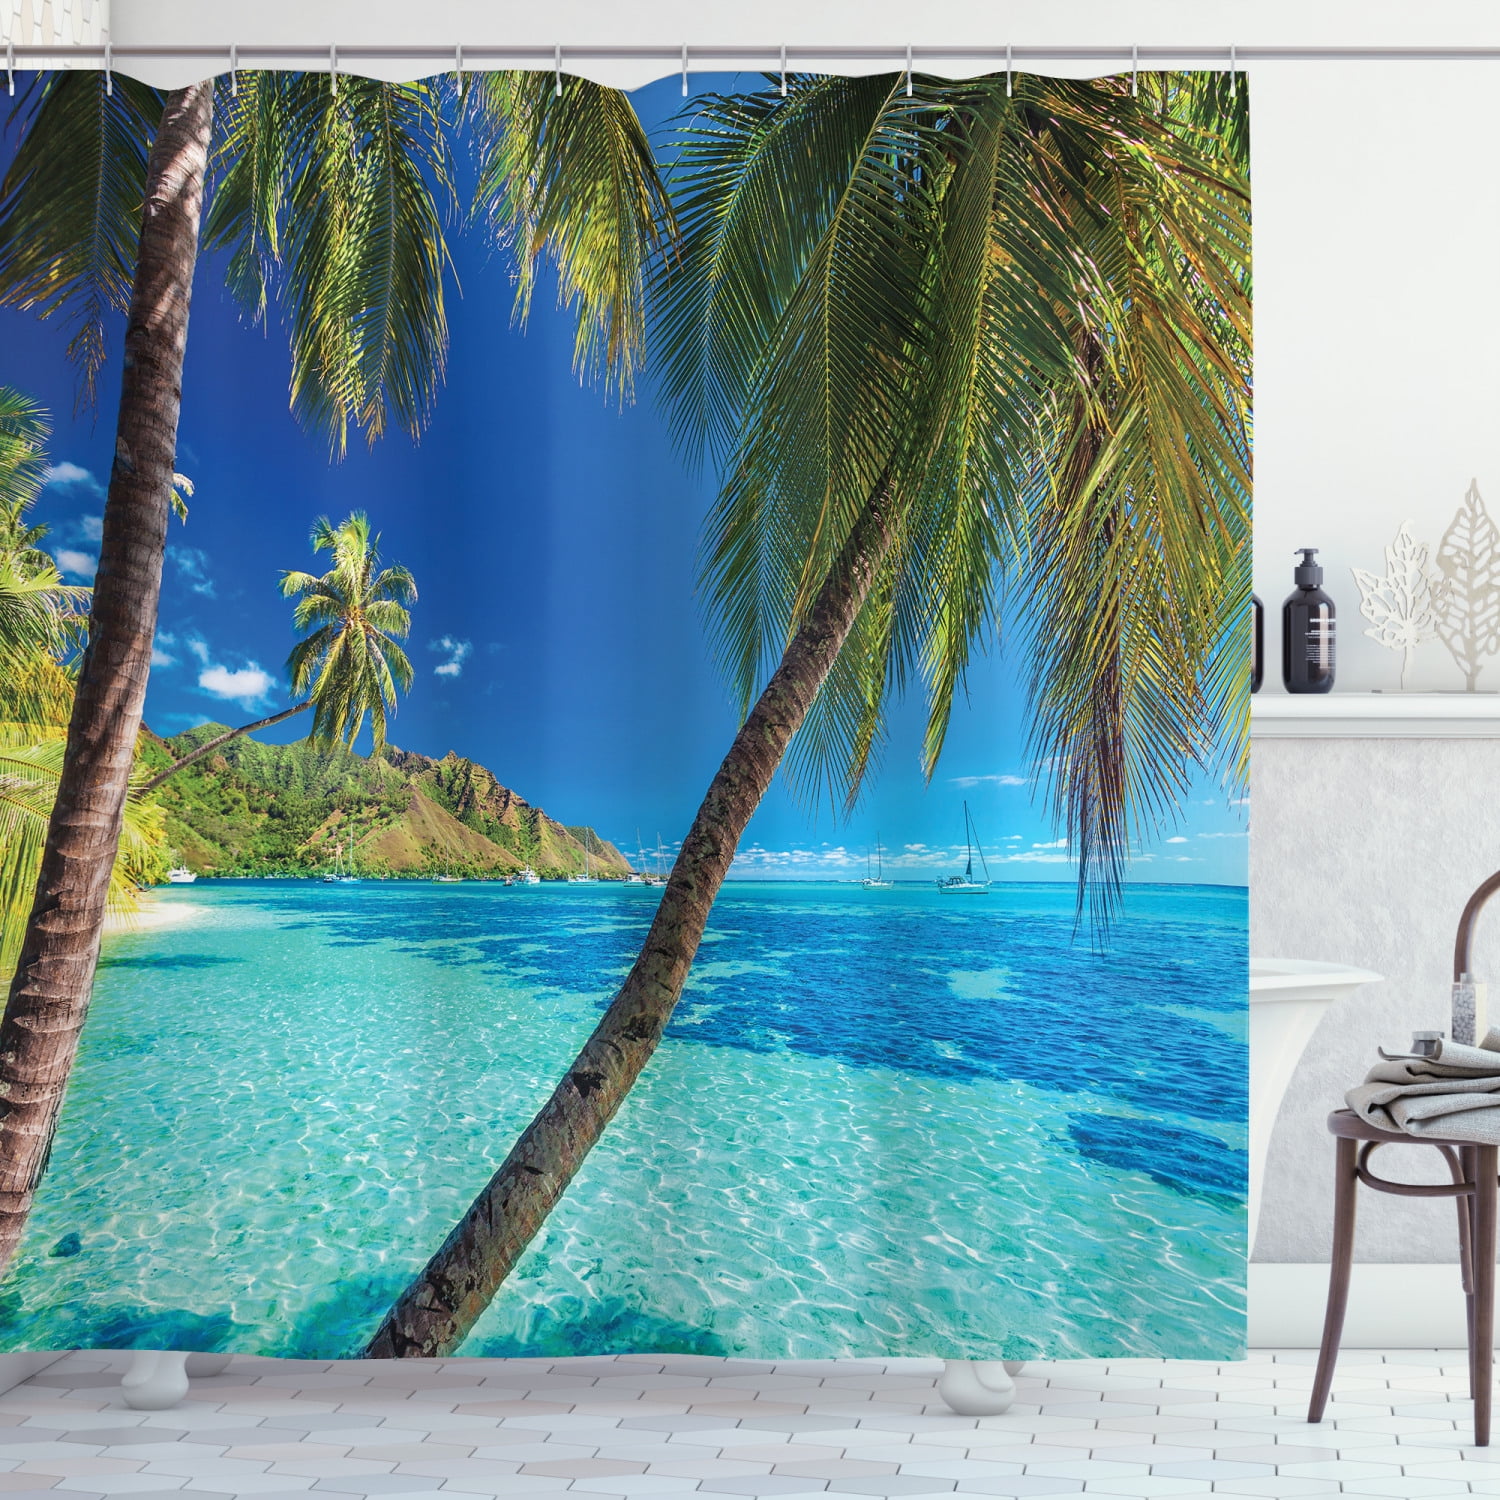 Details about   Landscape Shower Curtain Palm Trees on Beach Print for Bathroom 